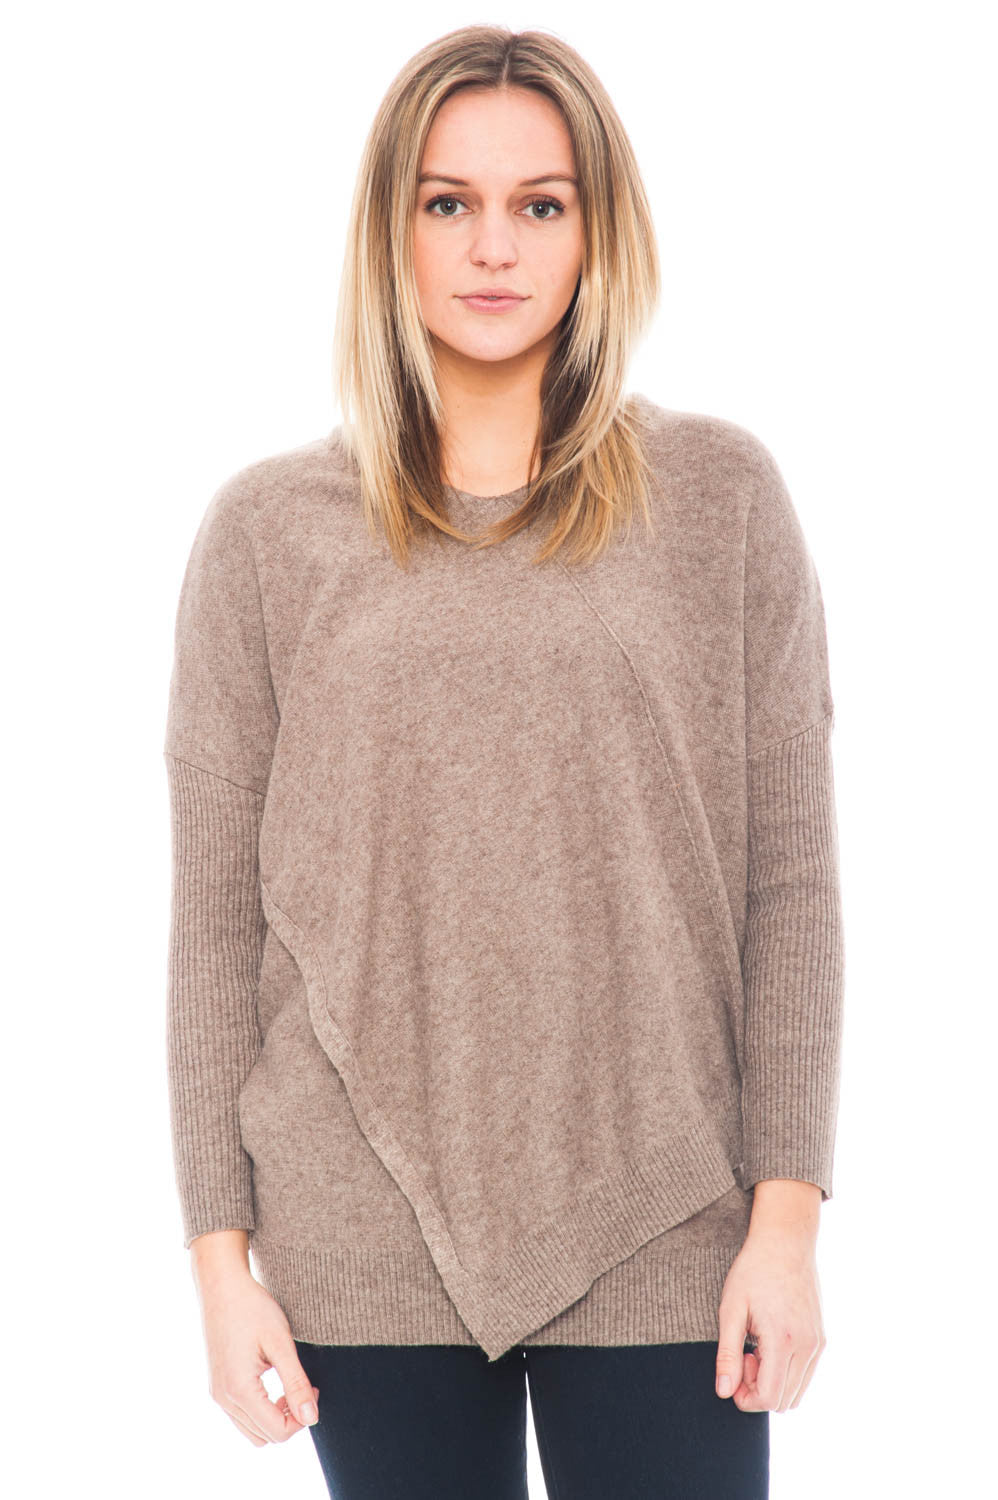 Sweater - Asymmetrical Cut Tunic with an Overlap Front